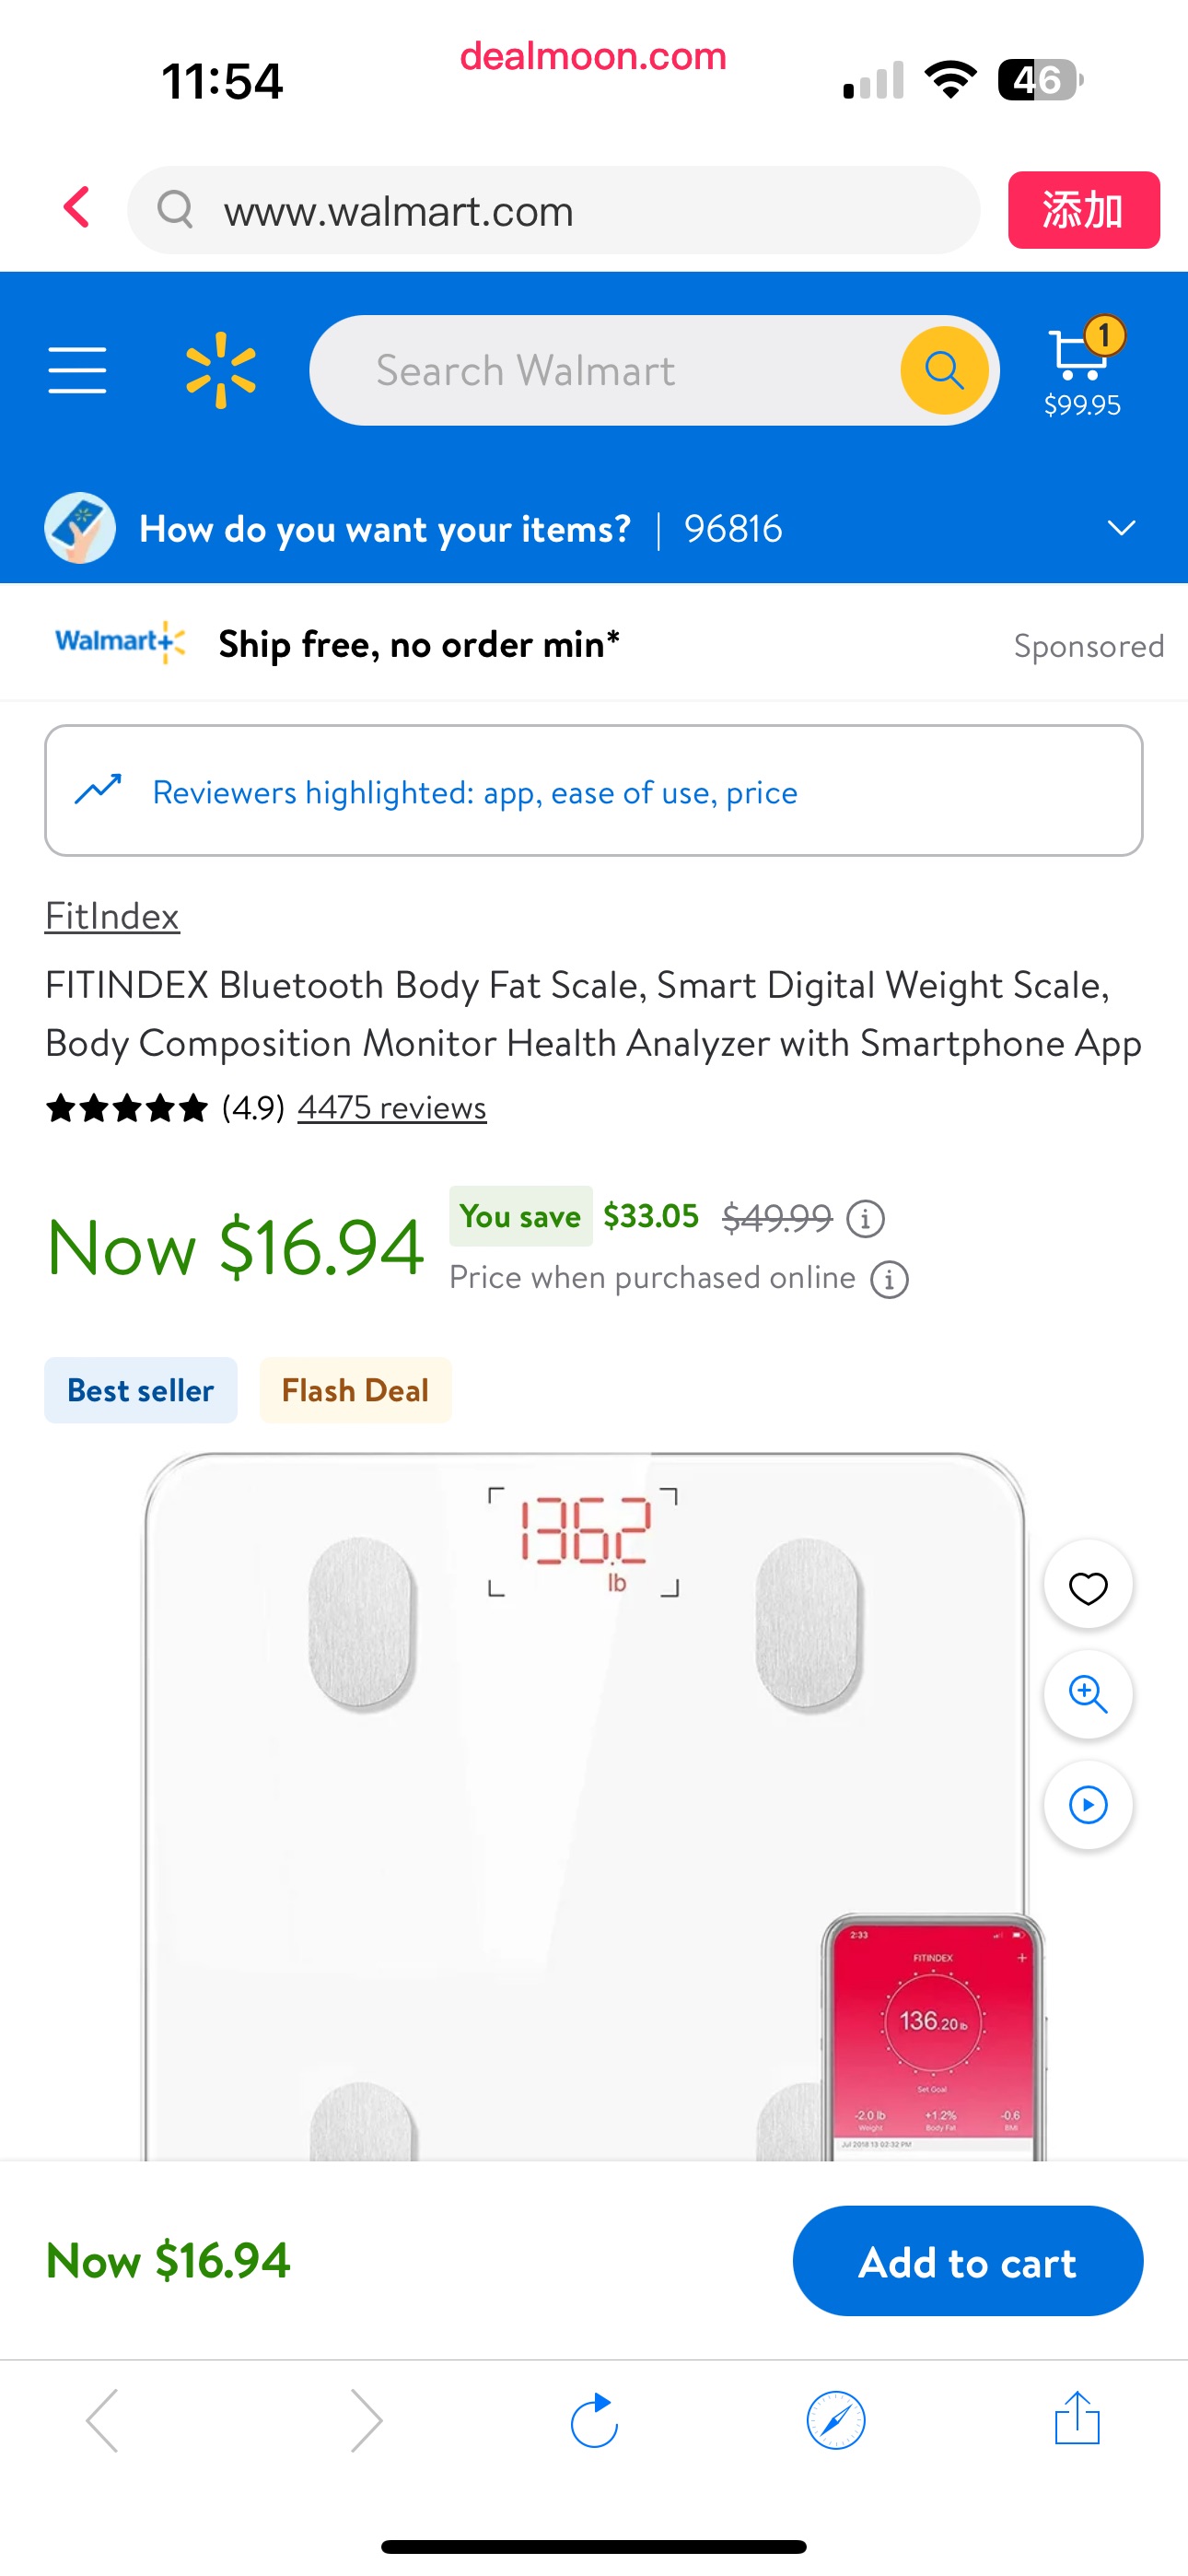 FITINDEX Bluetooth Body Fat Scale, Smart Digital Weight Scale, Body Composition Monitor Health Analyzer with Smartphone App - Walmart.com蓝牙体脂秤